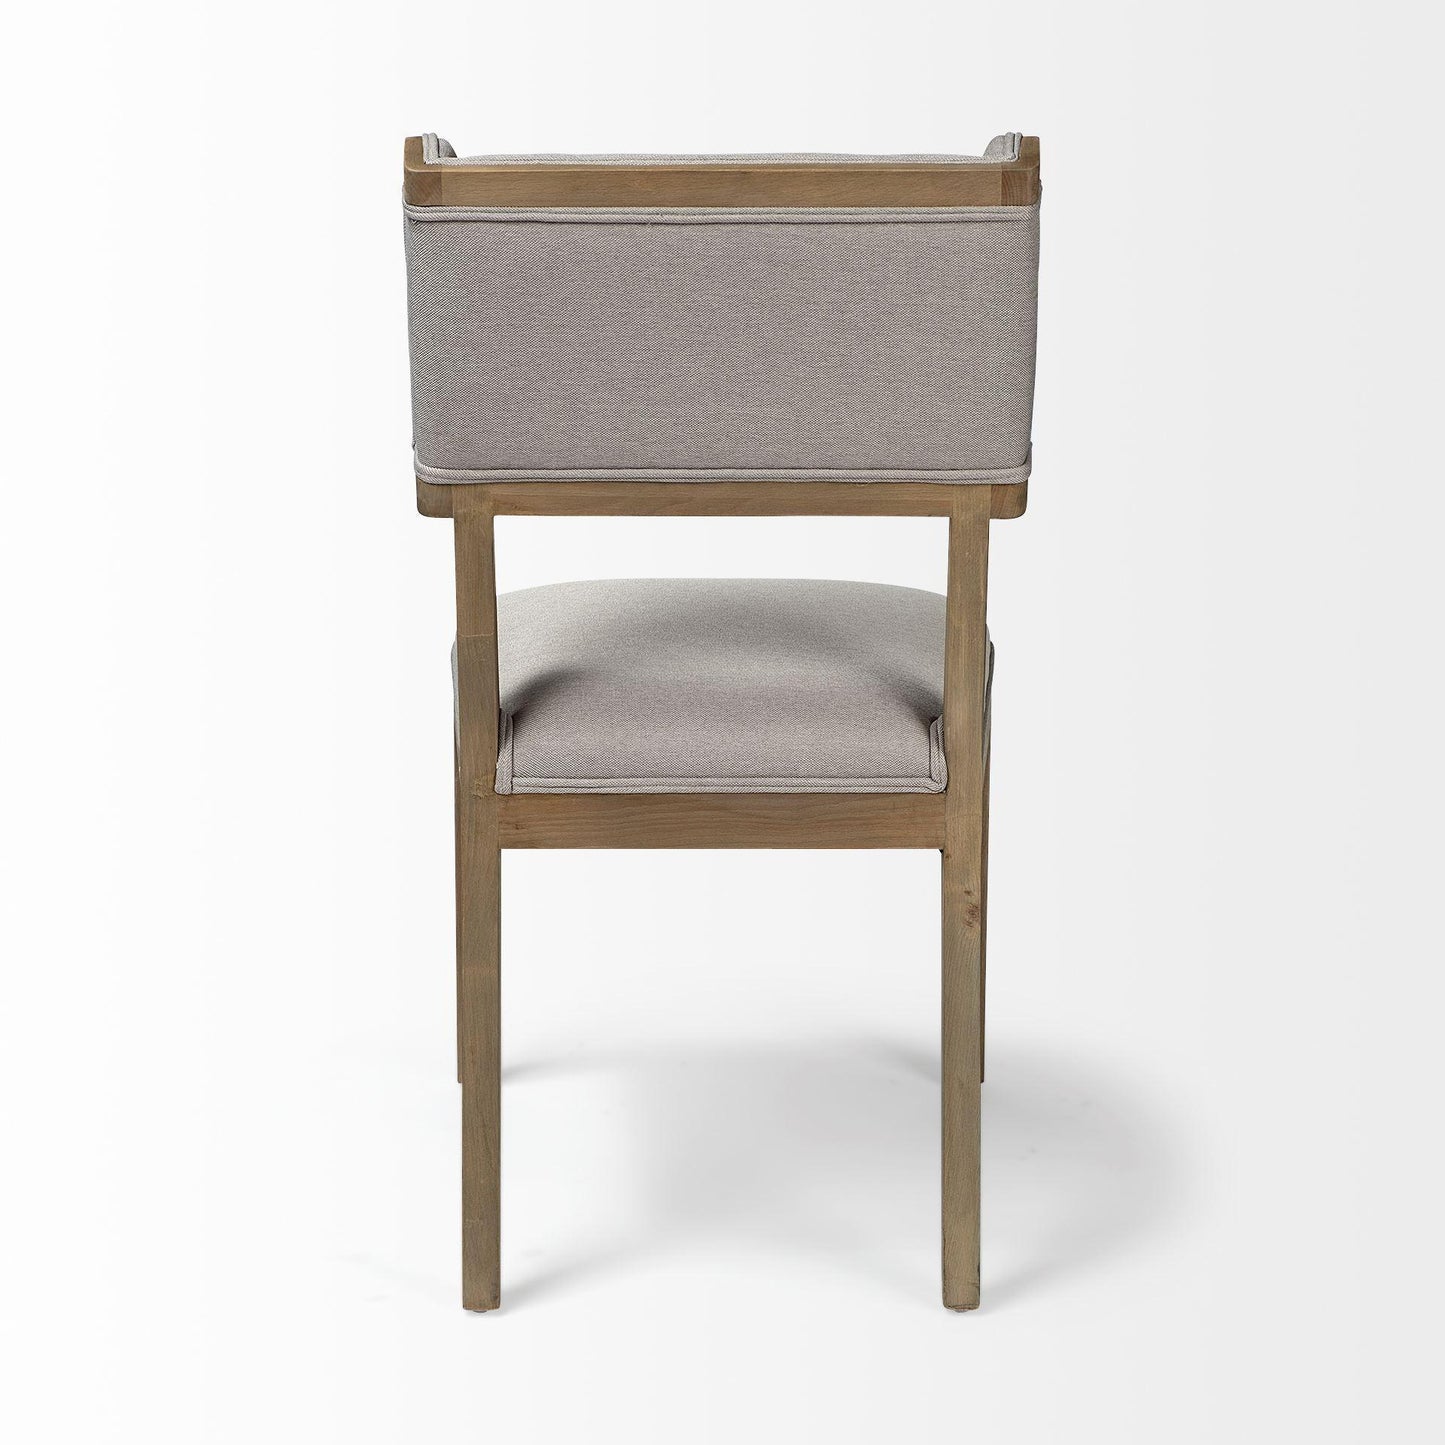 Araxi Table - 6 Chairs